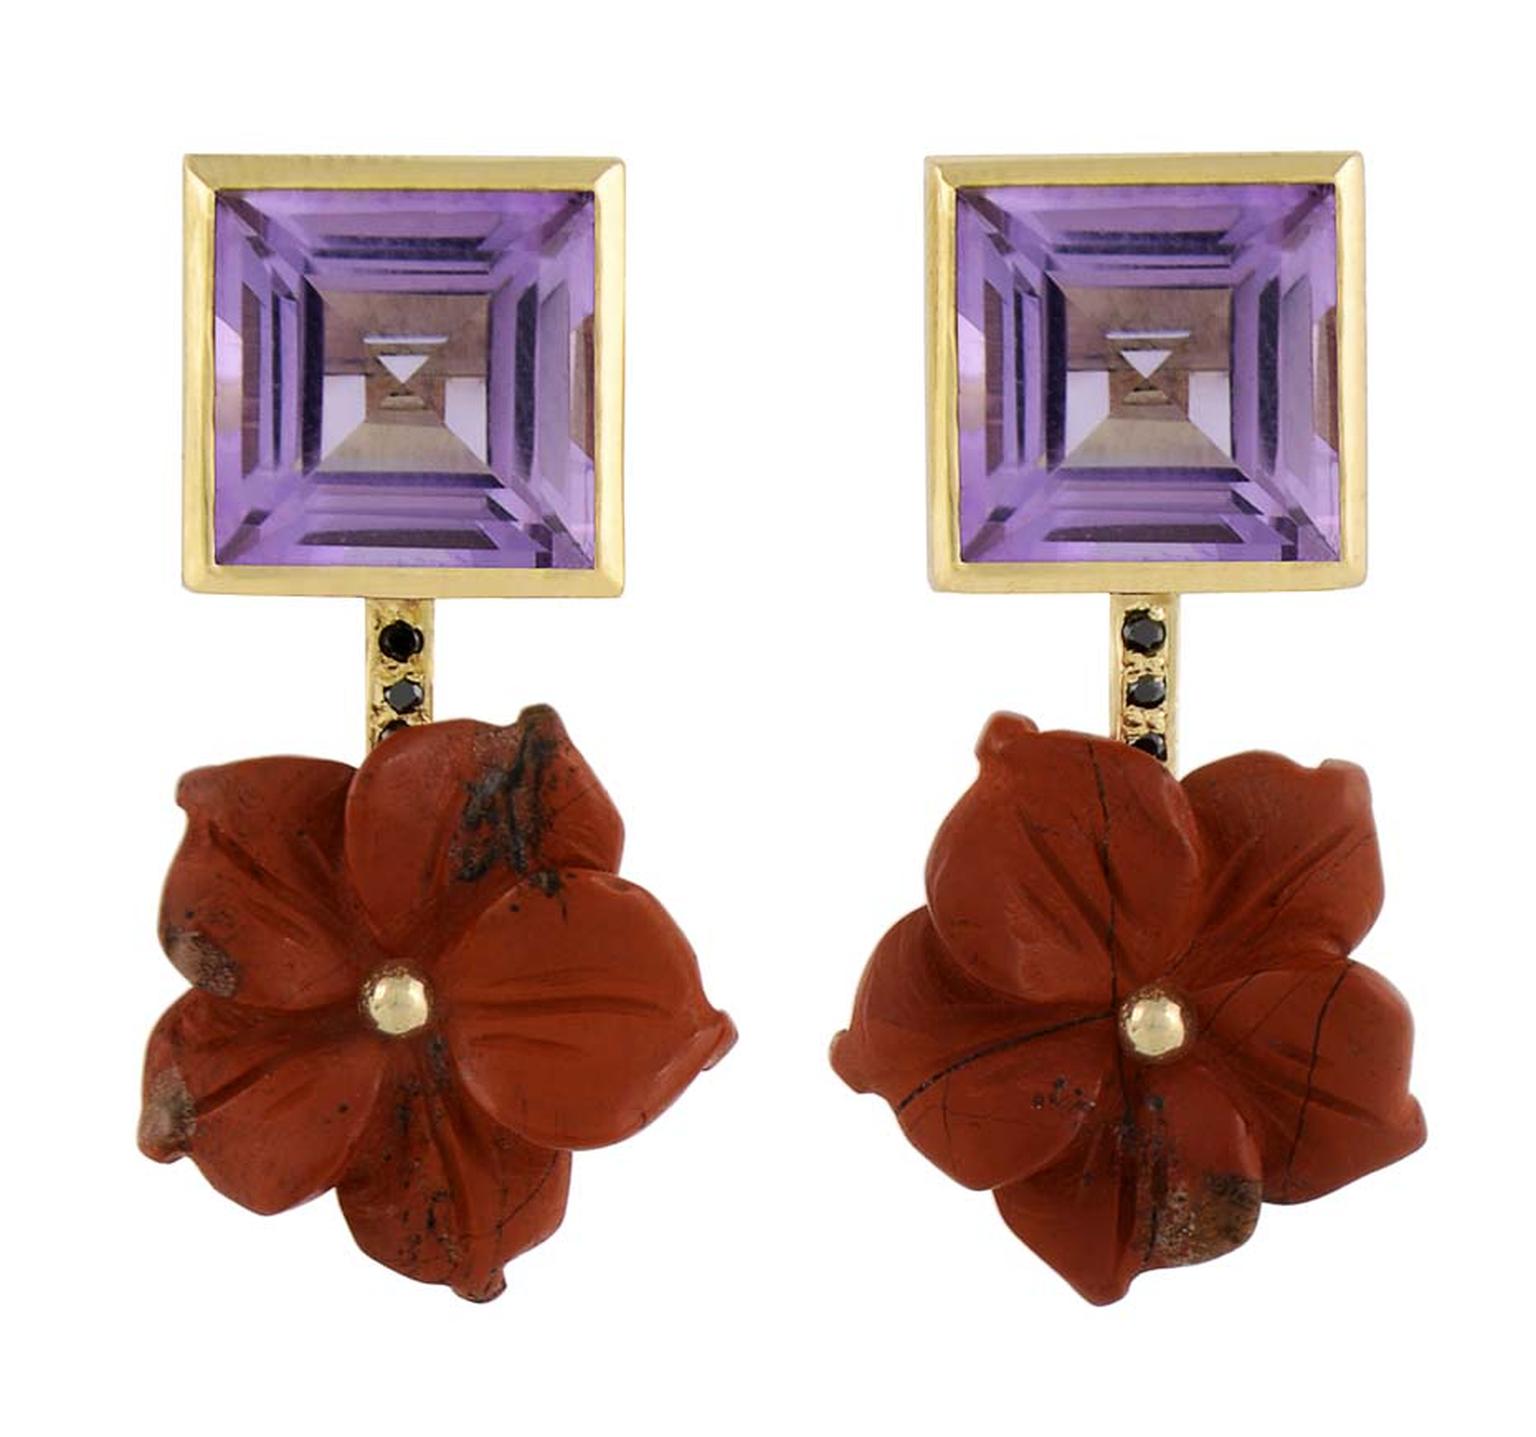 Tessa Packard yellow gold Chinatown earrings featuring black diamond, amethyst and carved red jasper flowers